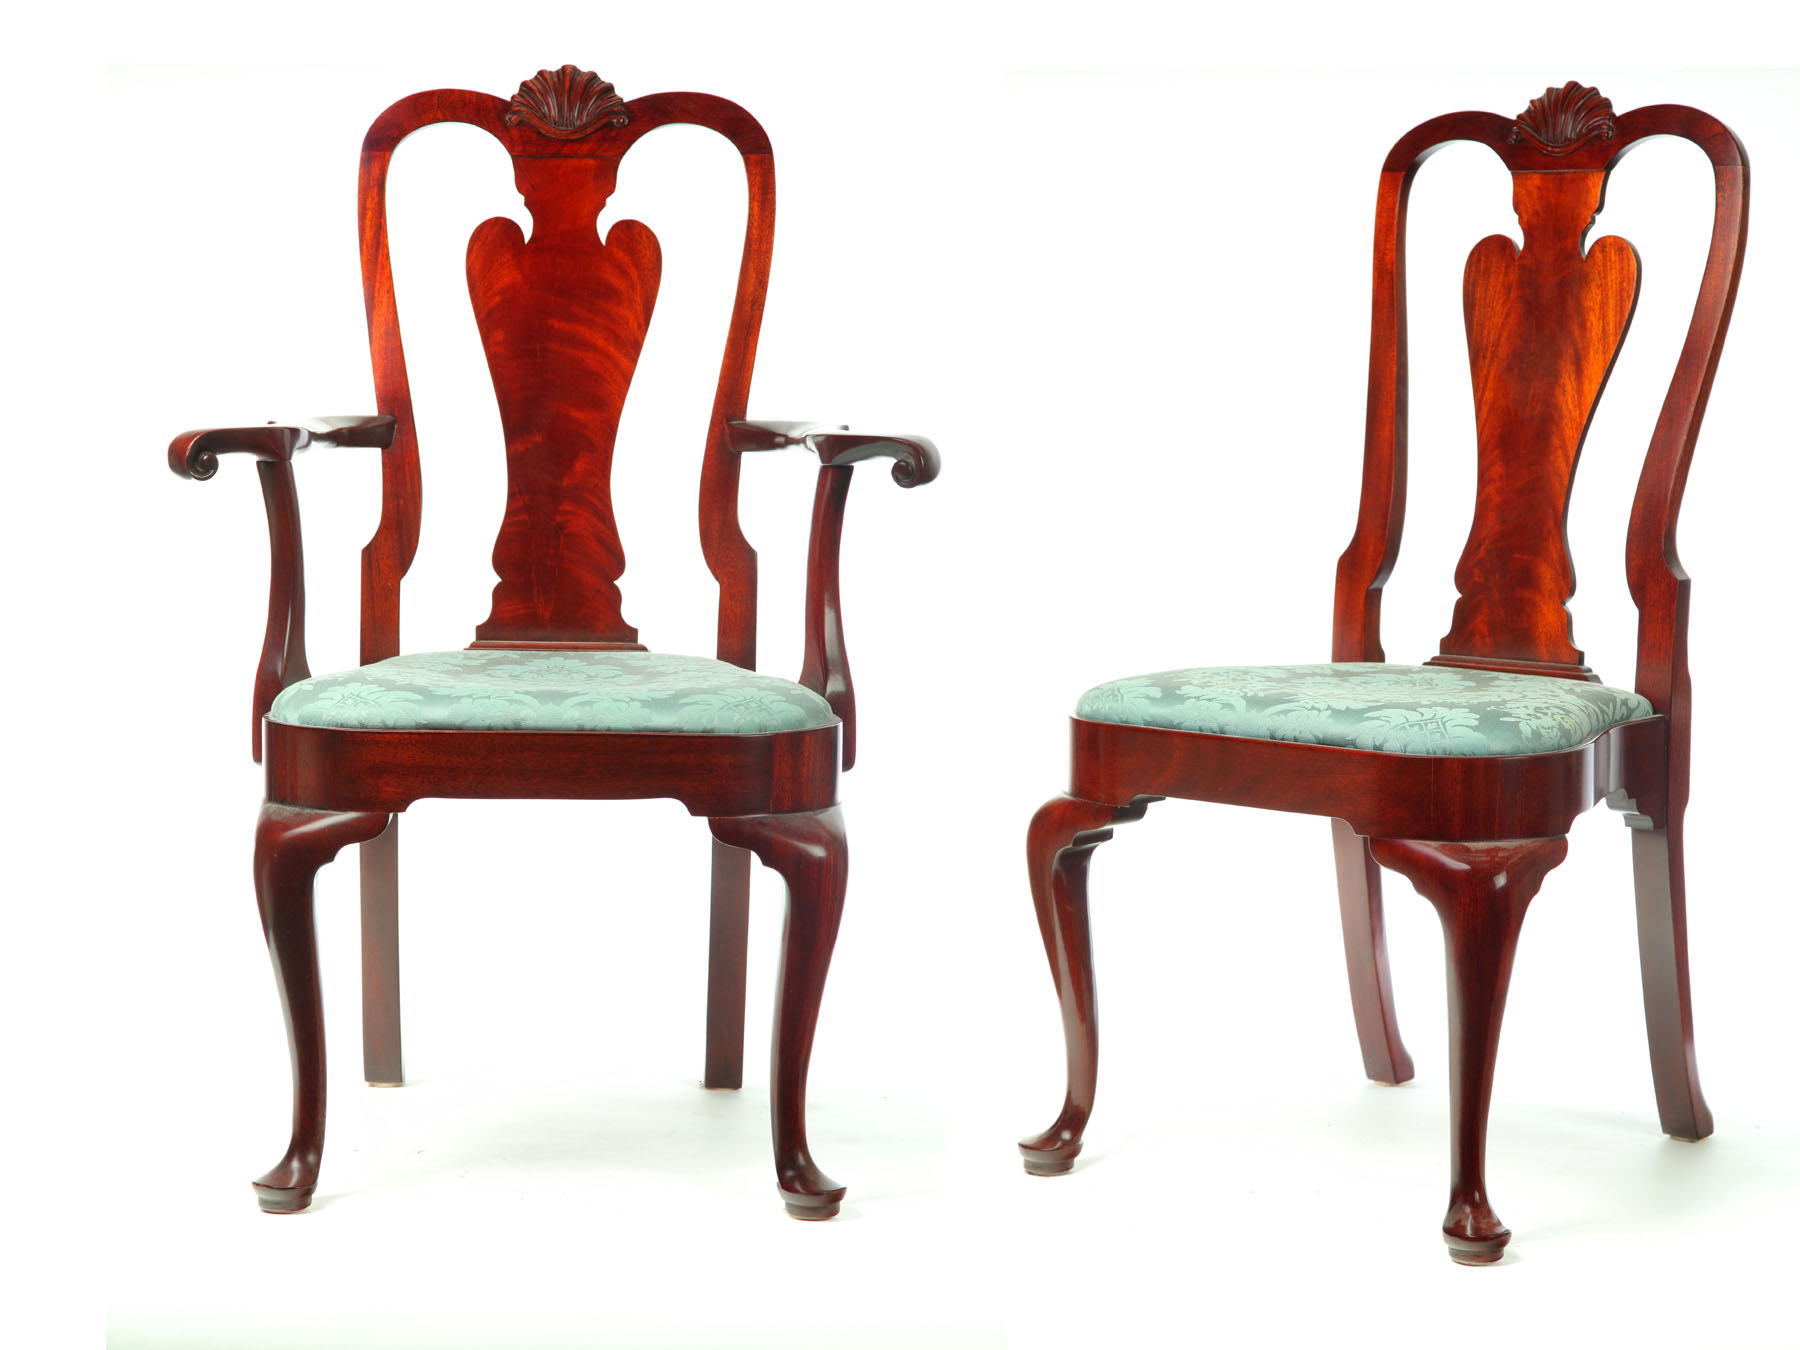 SET OF SIX QUEEN ANNE STYLE DINING 11717b